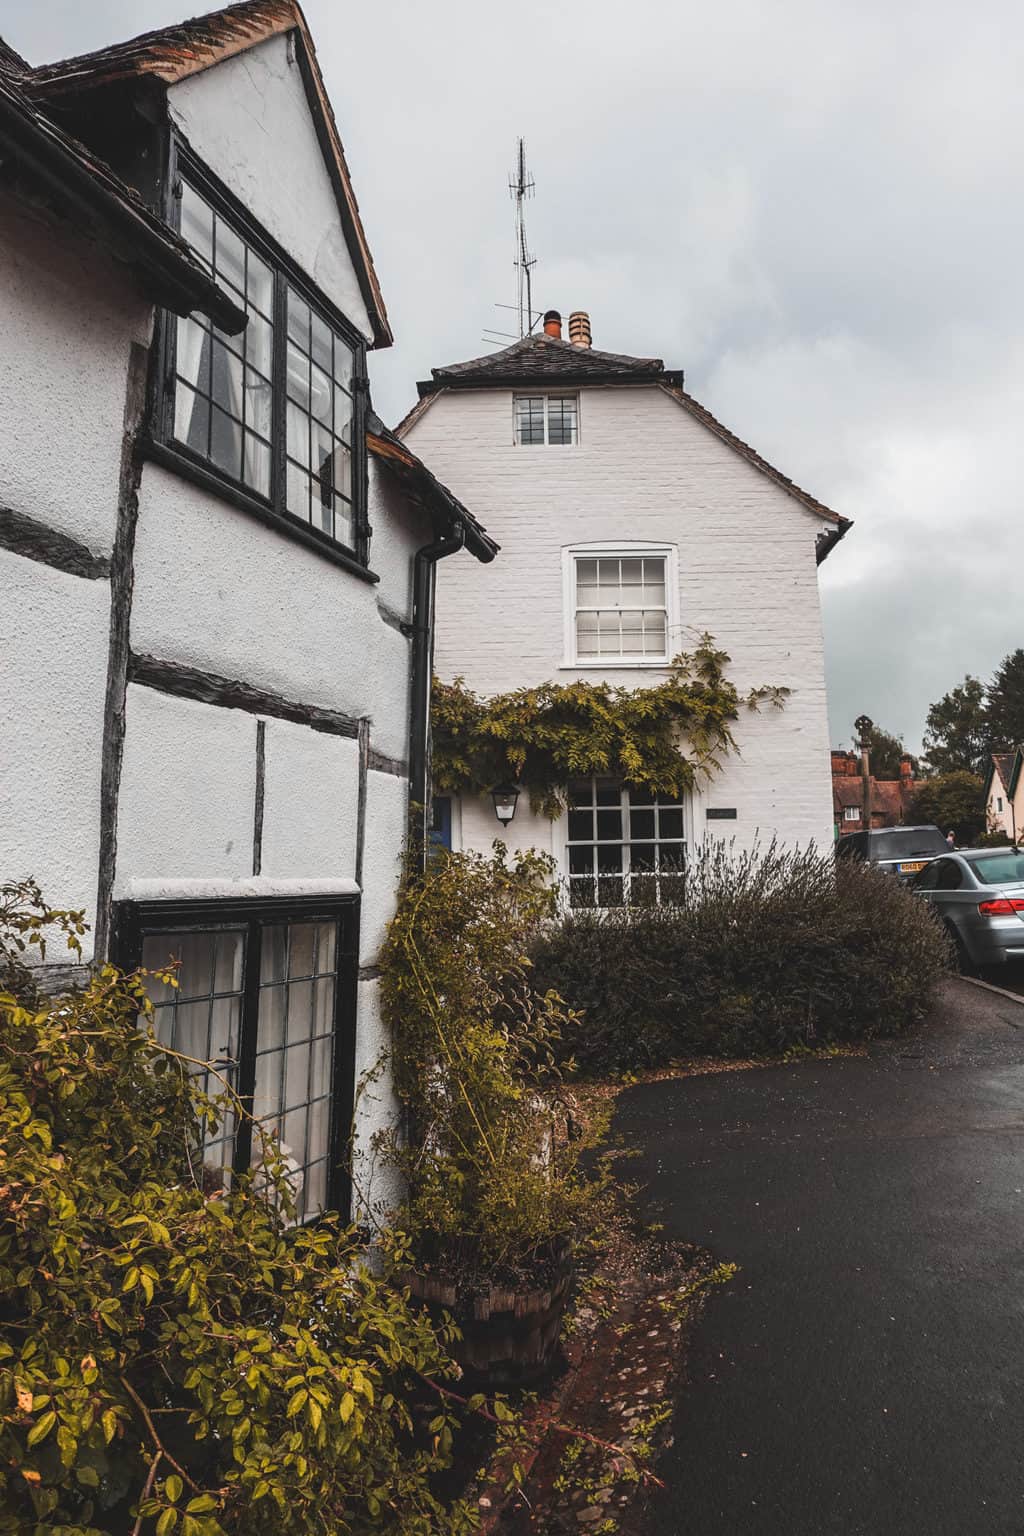 Shere, Guildford, Amberley & Gravetye - a day trip to Surrey & West Sussex countryside